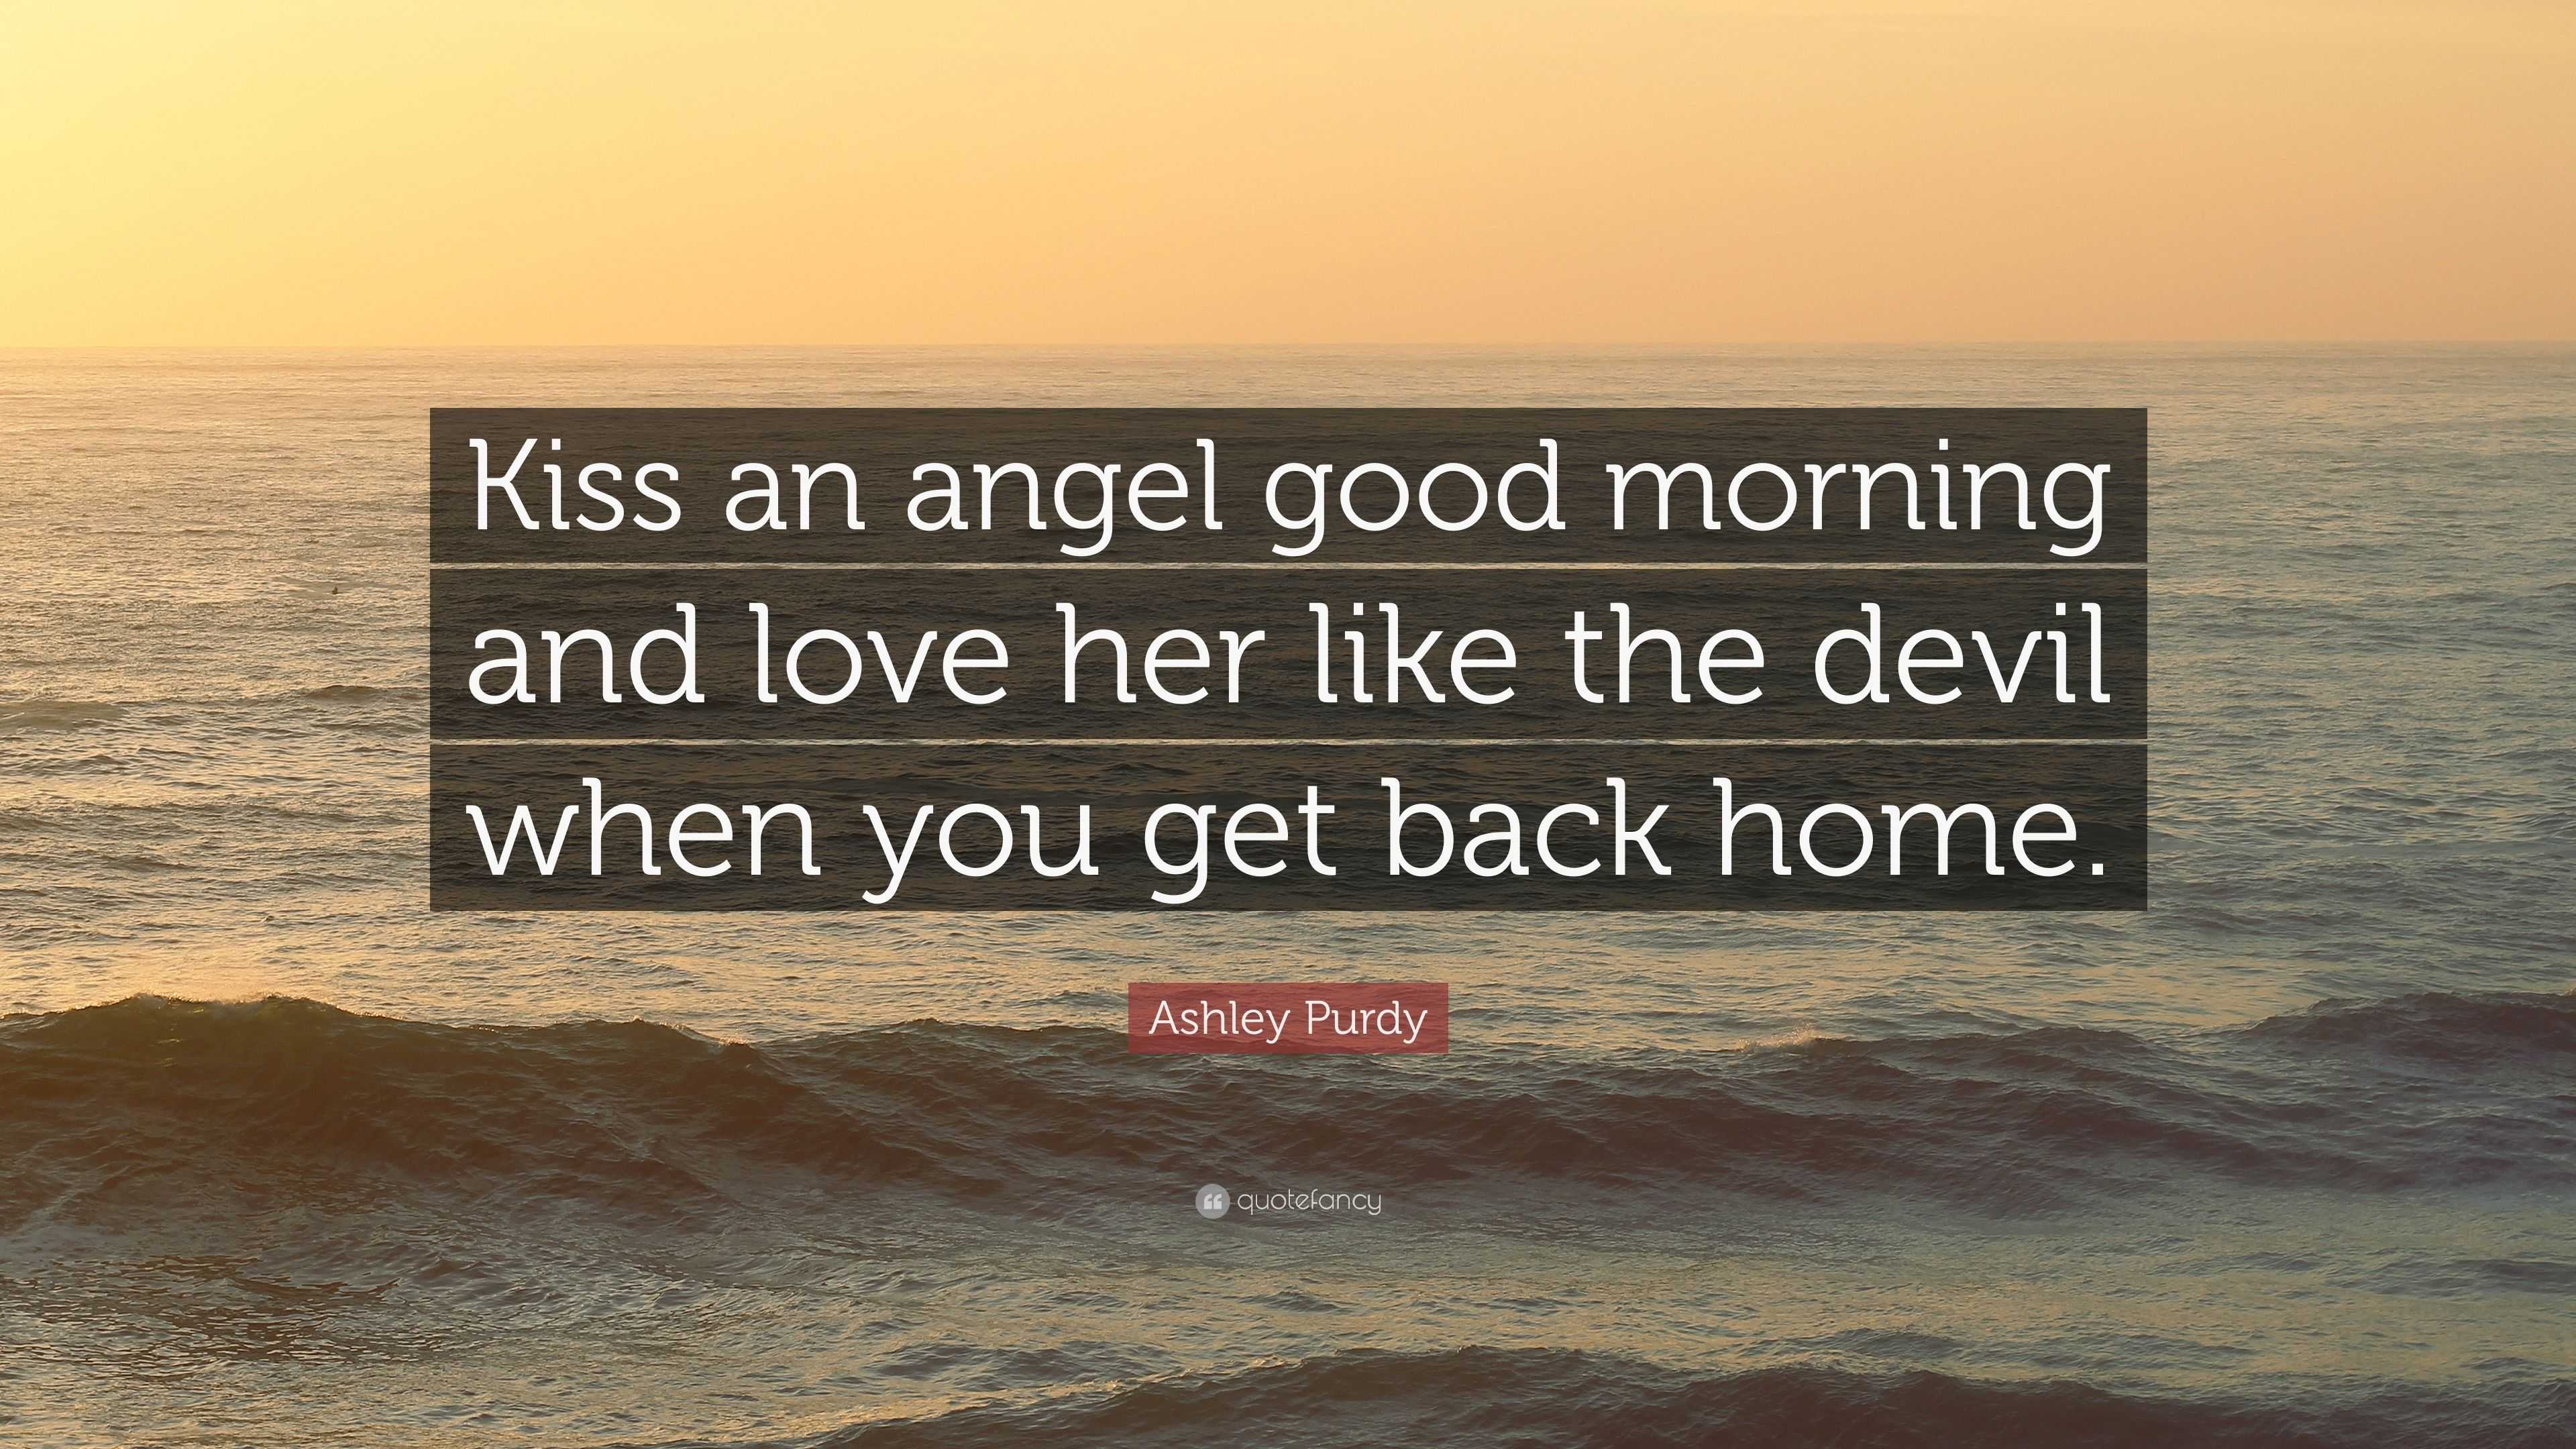 Ashley Purdy Quote “Kiss an angel good morning and love her like the devil